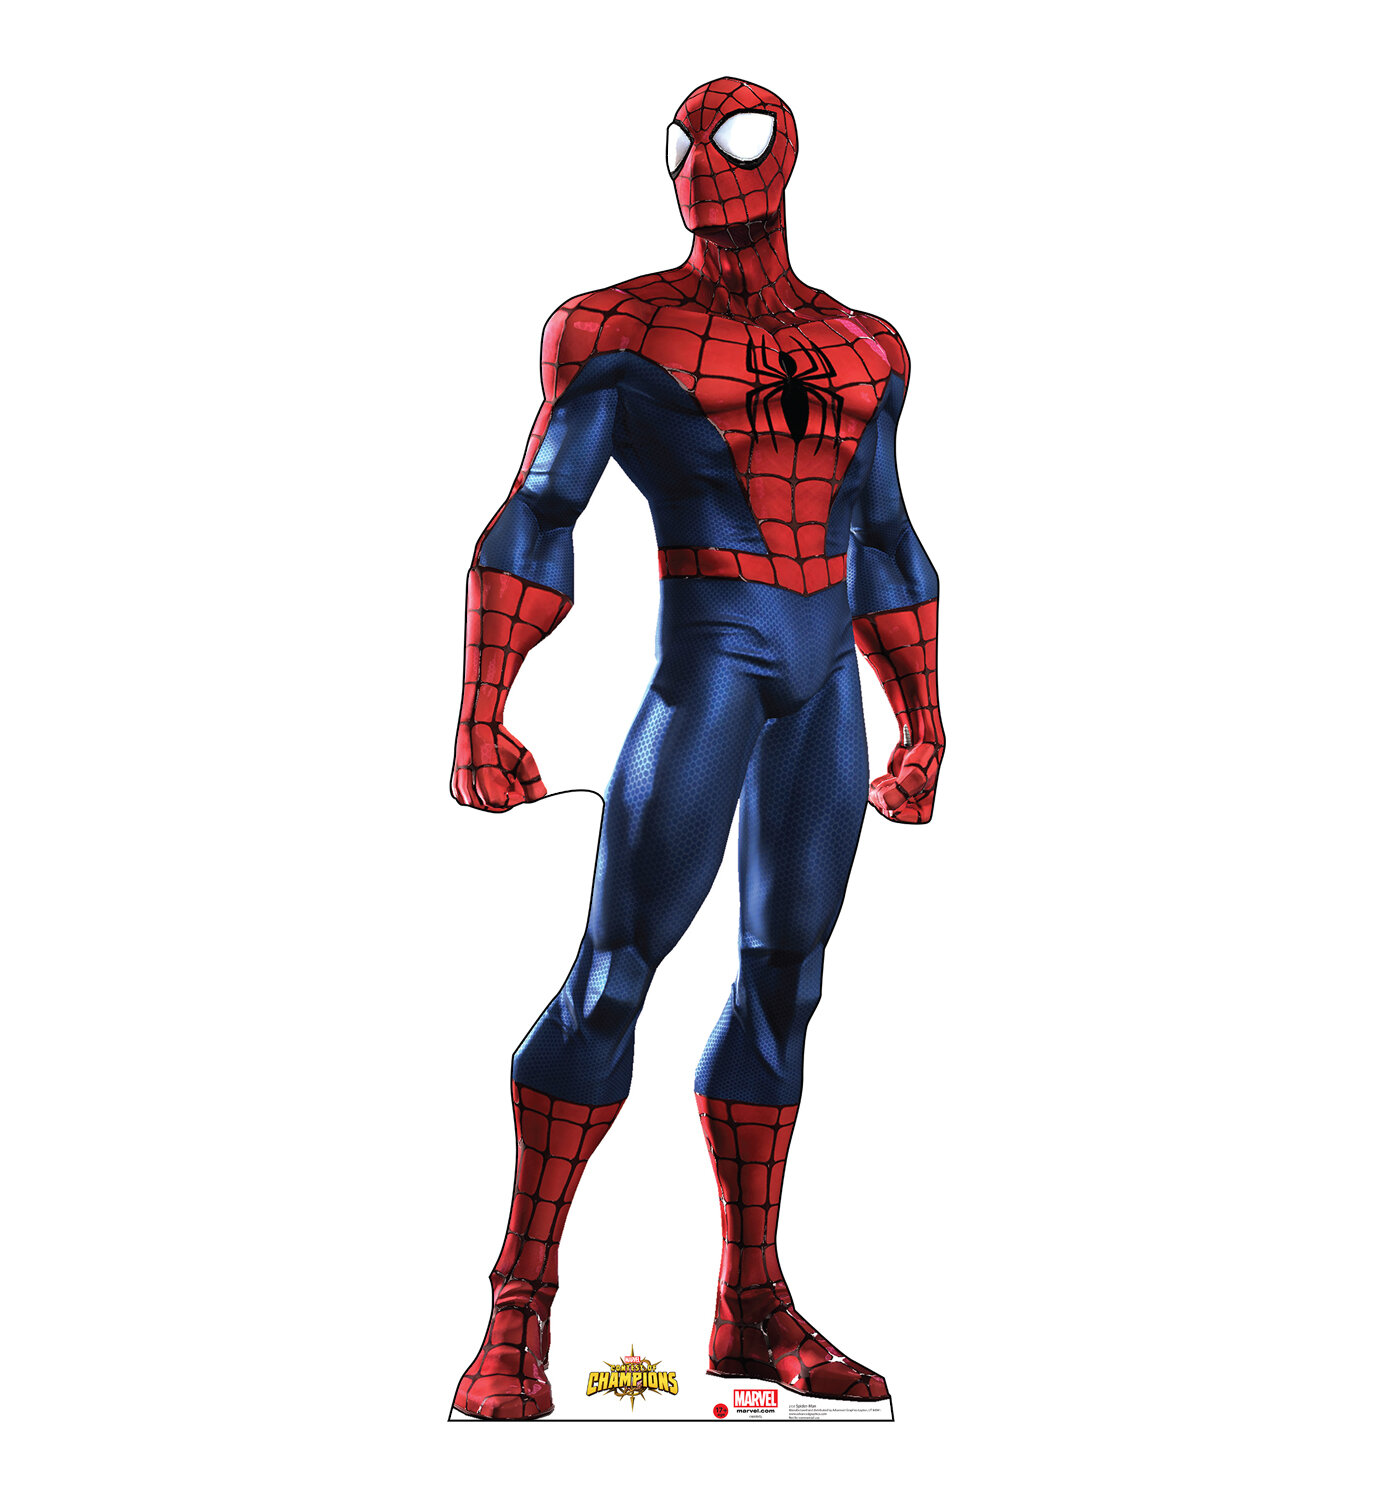 Spider-Man Child Size Stand-In Marvel Cardboard Cutout Standup Party Photo Fun 